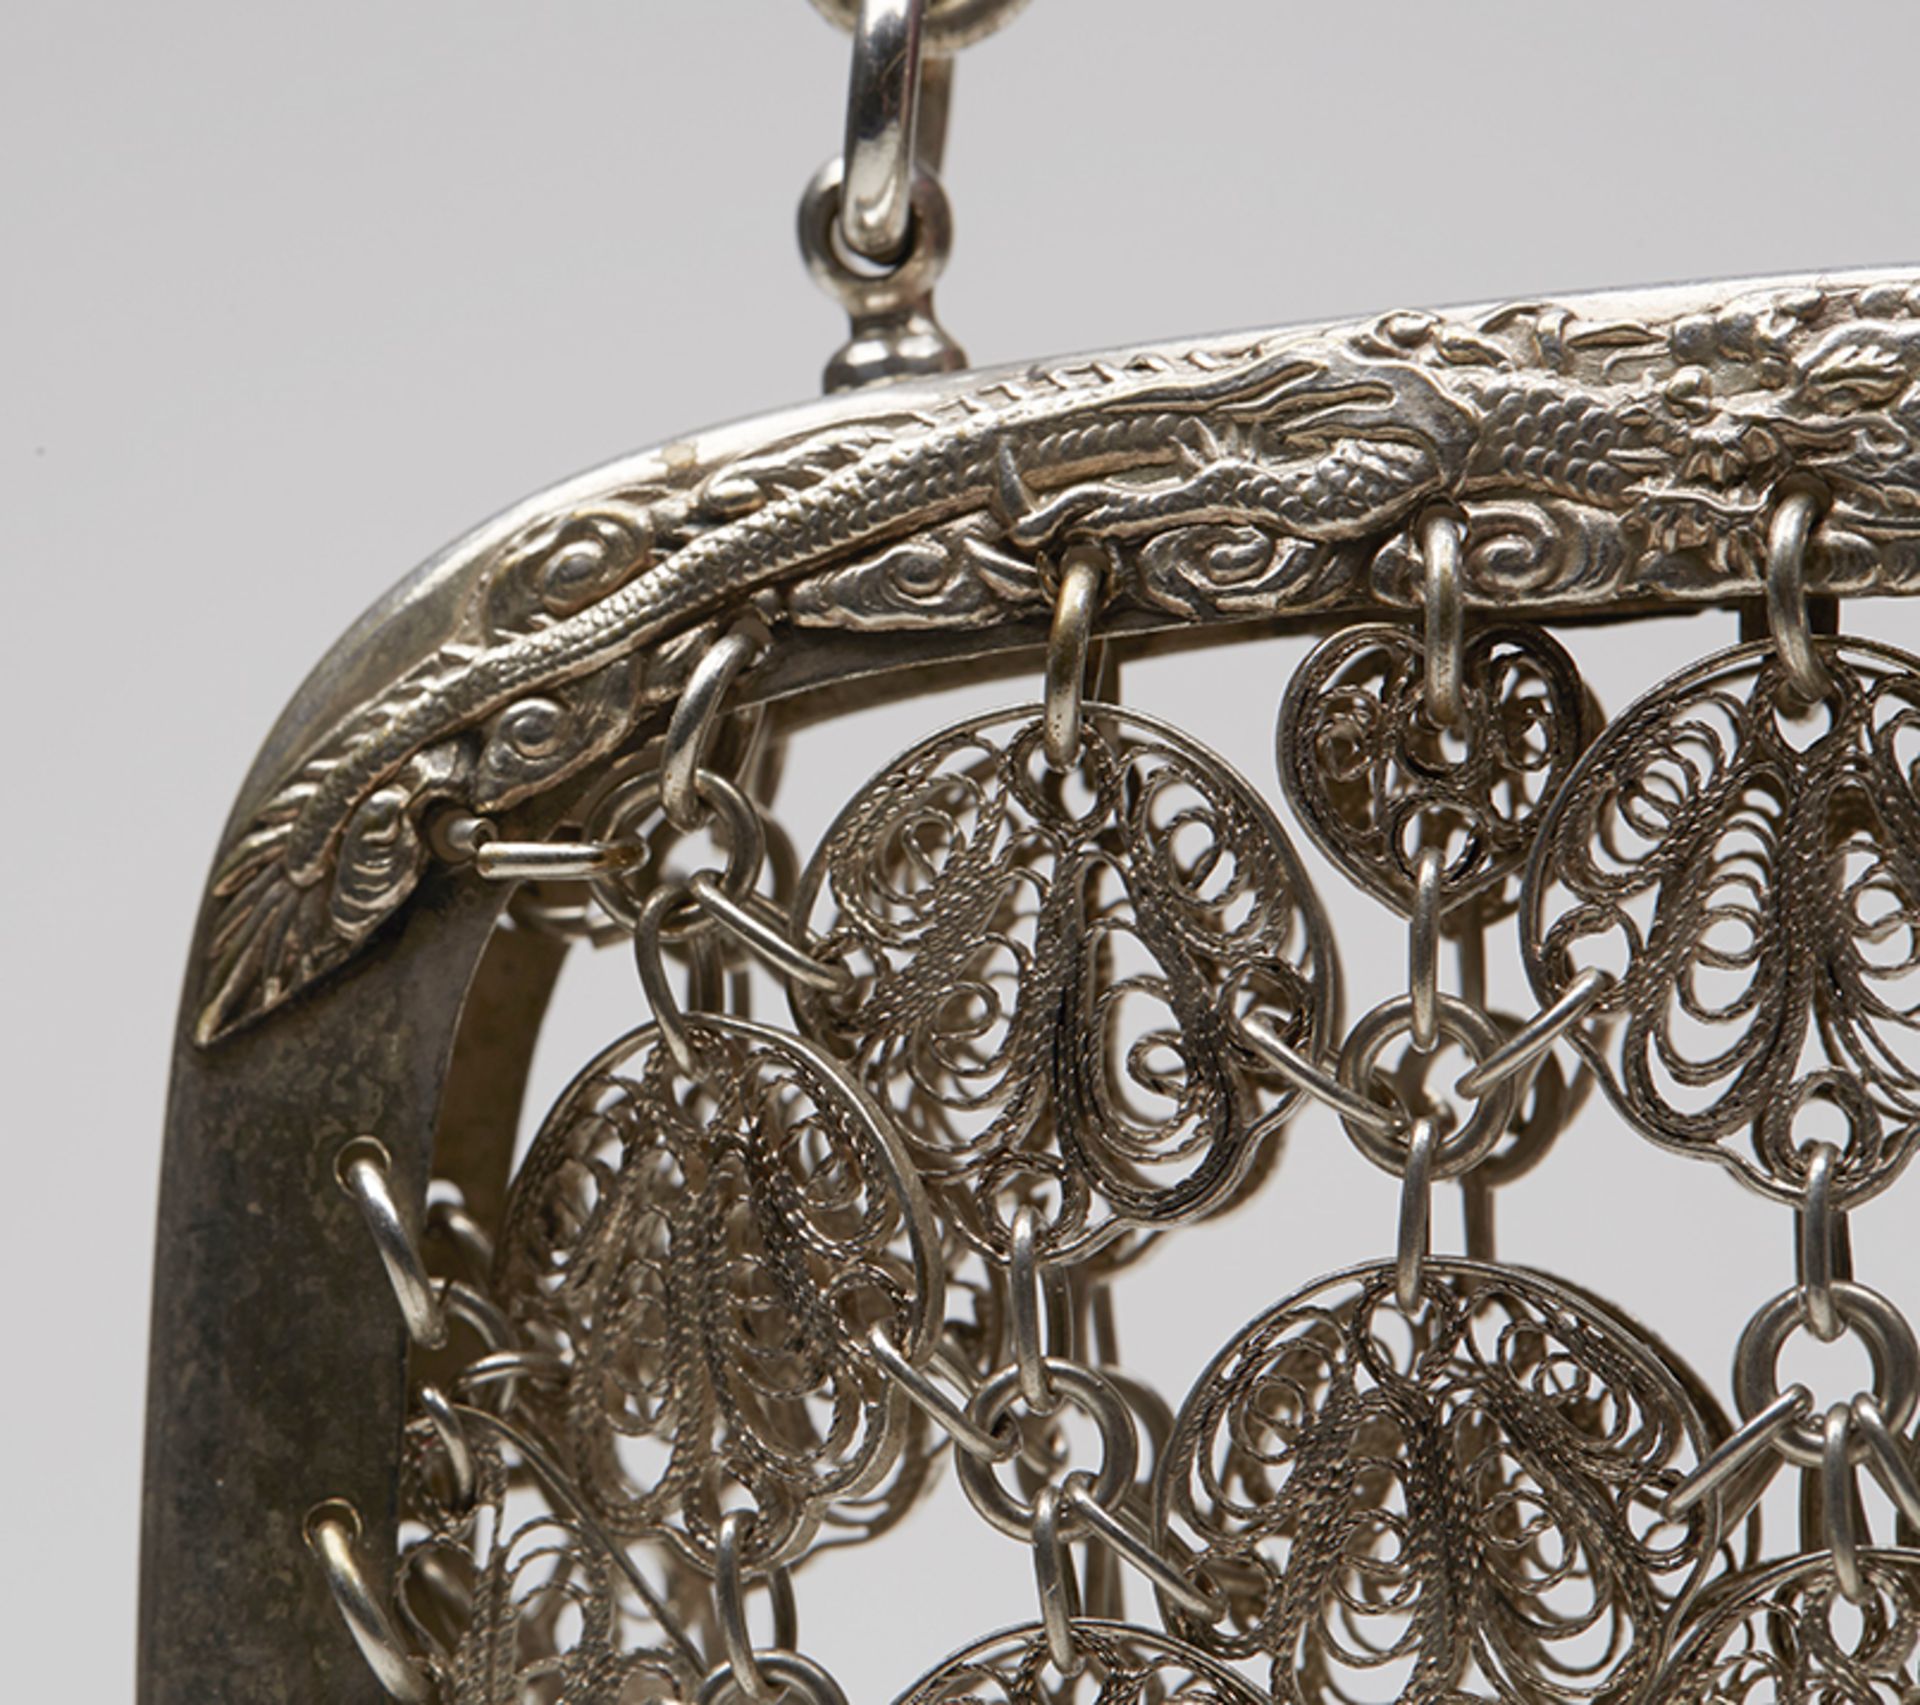 Antique Chinese Heavy Silver Filigree Chain Purse C.1900 - Image 8 of 10